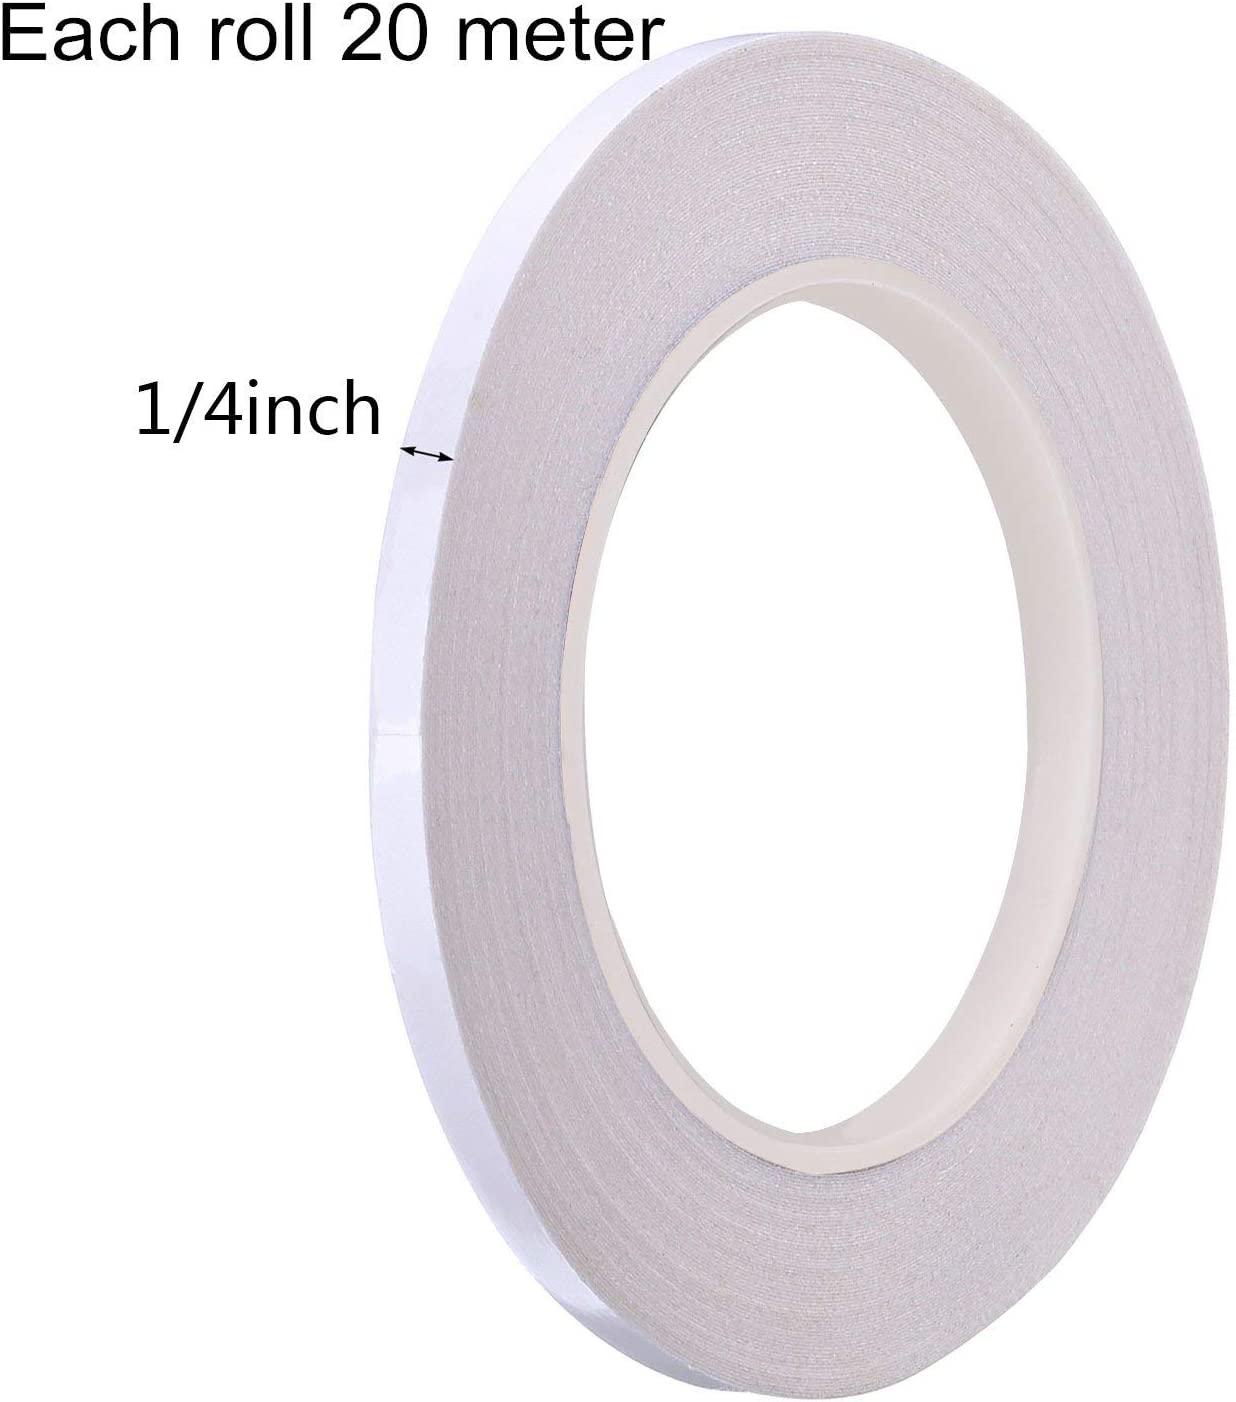 Hotop 1/4 Inch Quilting Sewing Tape Wash Away Tape, Each 22 Yard